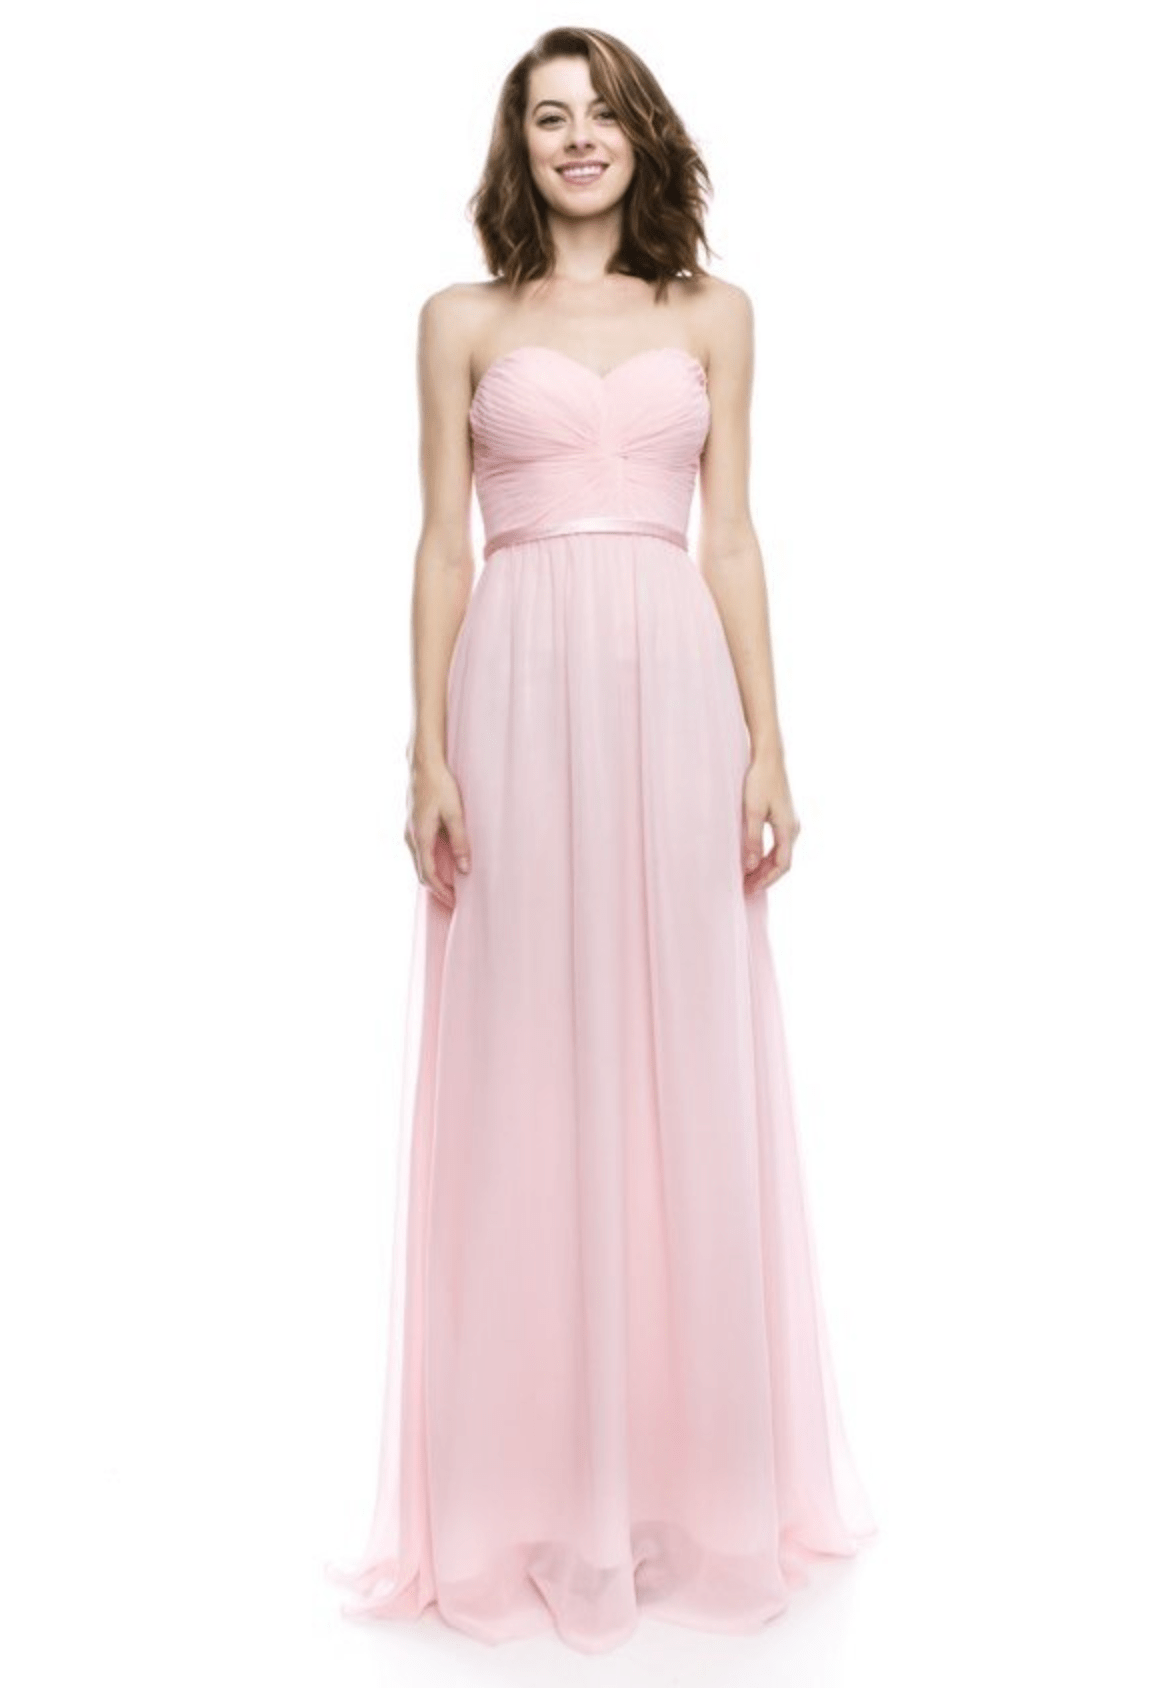 Strapless Chiffon Dress by Chicas | 16 Colors Collection 2 - NORMA REED